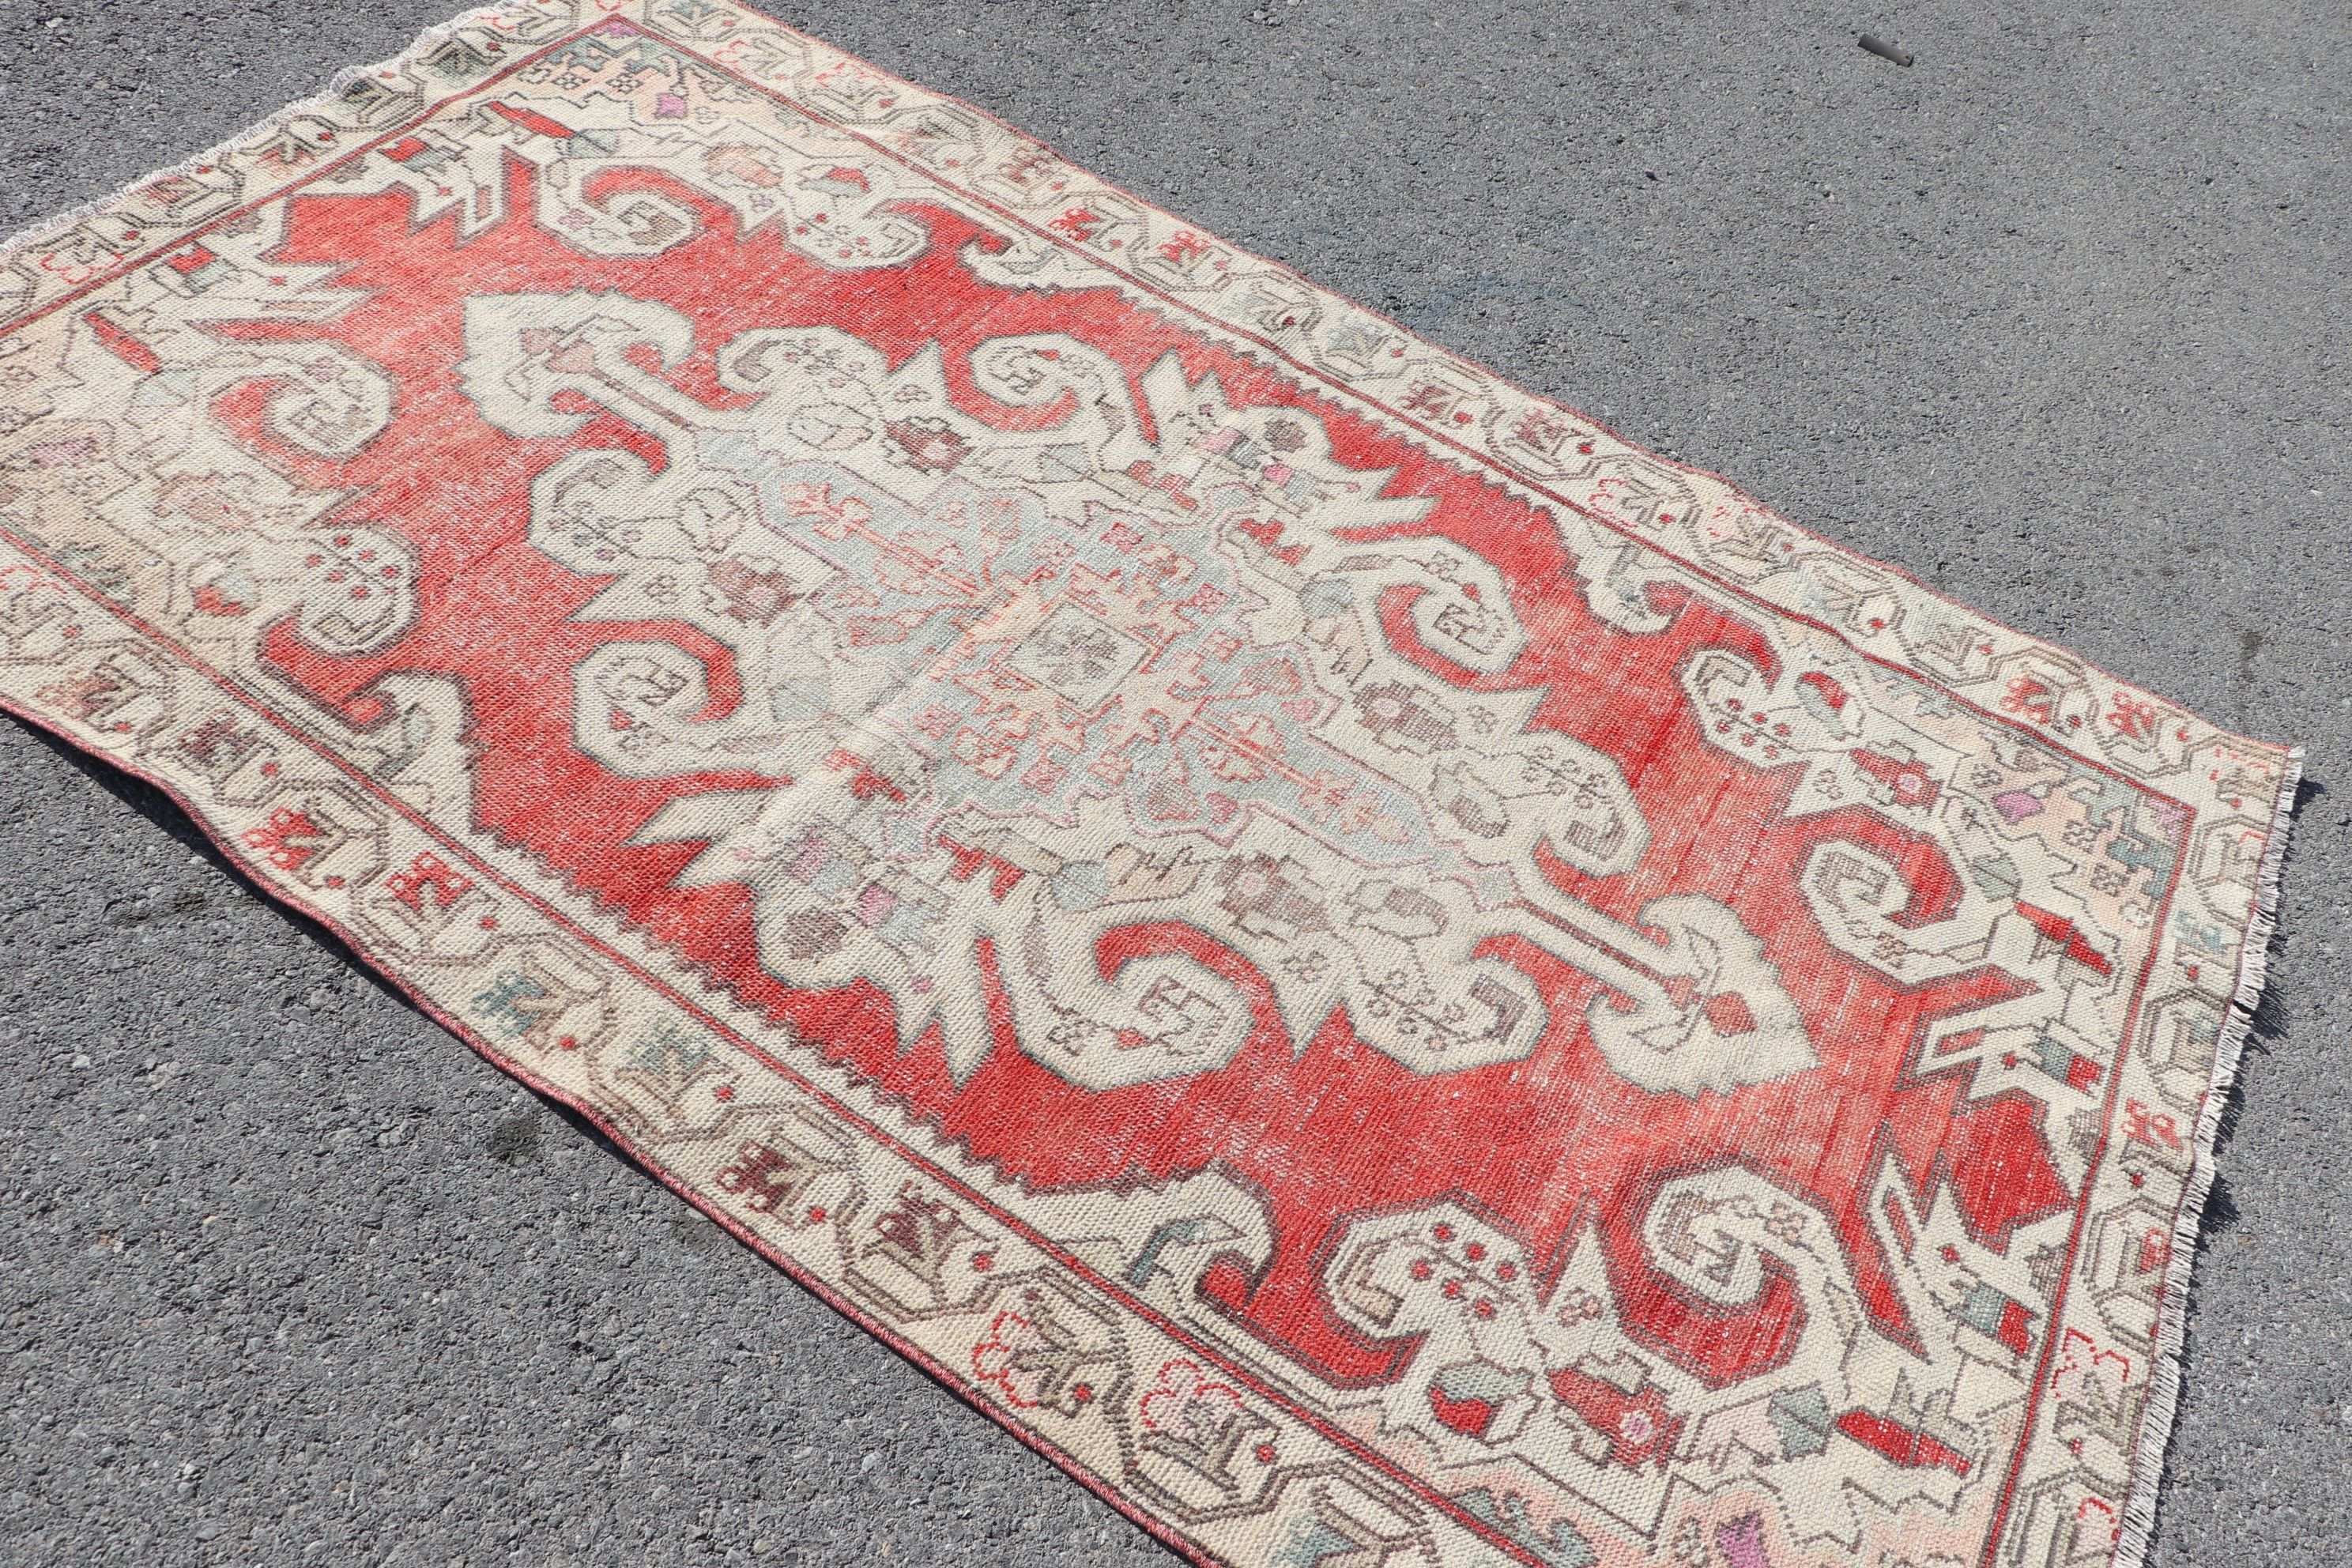 Kitchen Rugs, Dining Room Rug, 4.3x7.2 ft Area Rug, Red Cool Rugs, Bedroom Rugs, Vintage Rugs, Turkish Rug, Oushak Rugs, Rugs for Kitchen